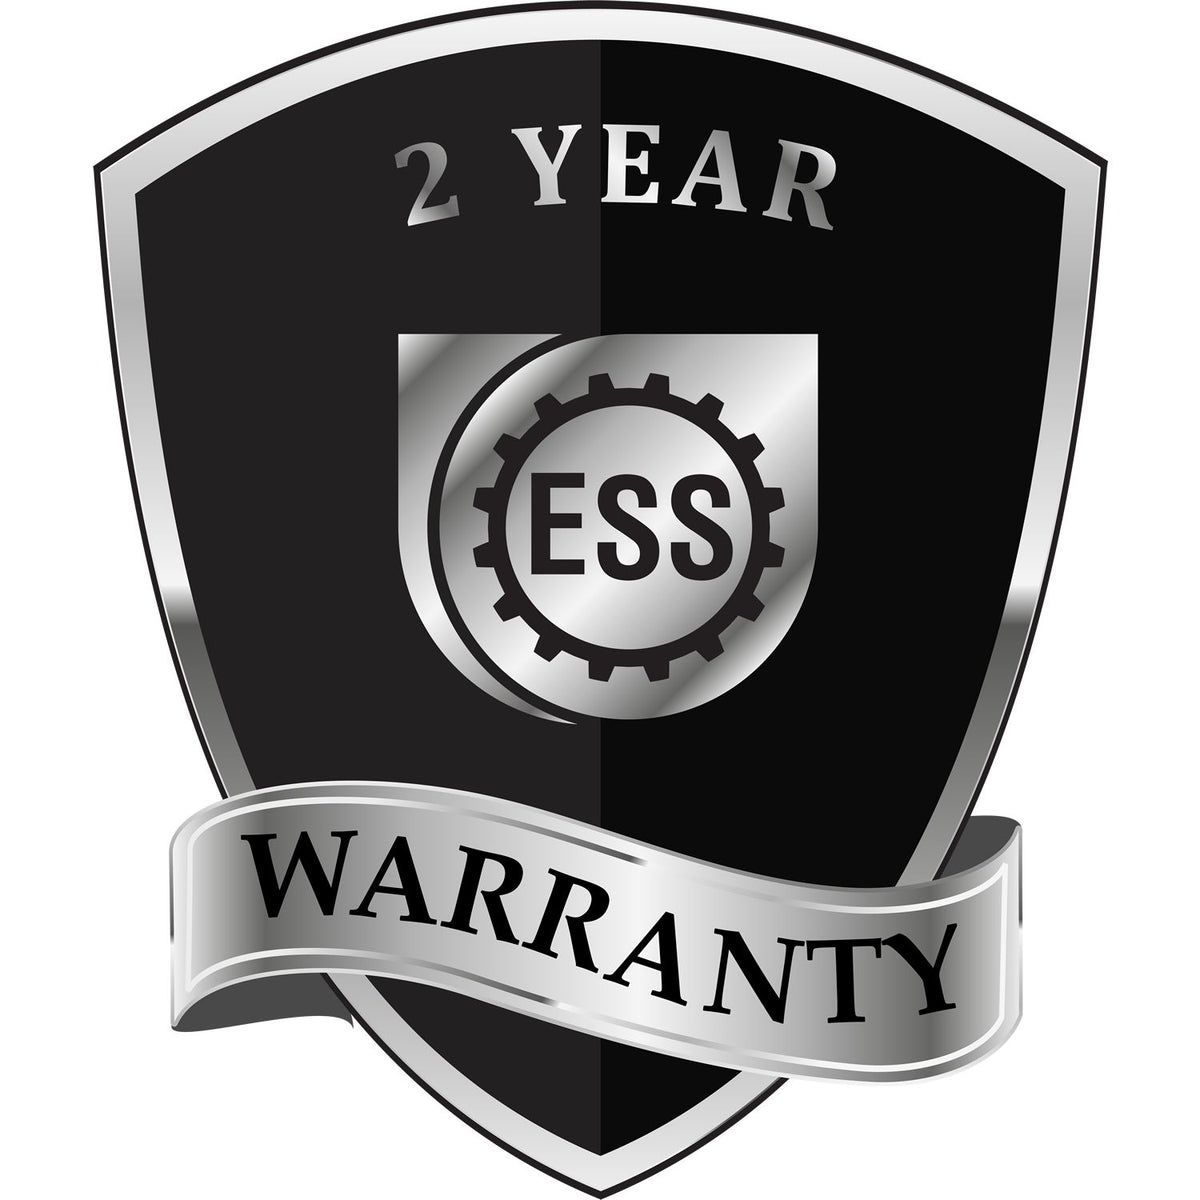 A black and silver badge or emblem showing warranty information for the Hybrid Kentucky Geologist Seal